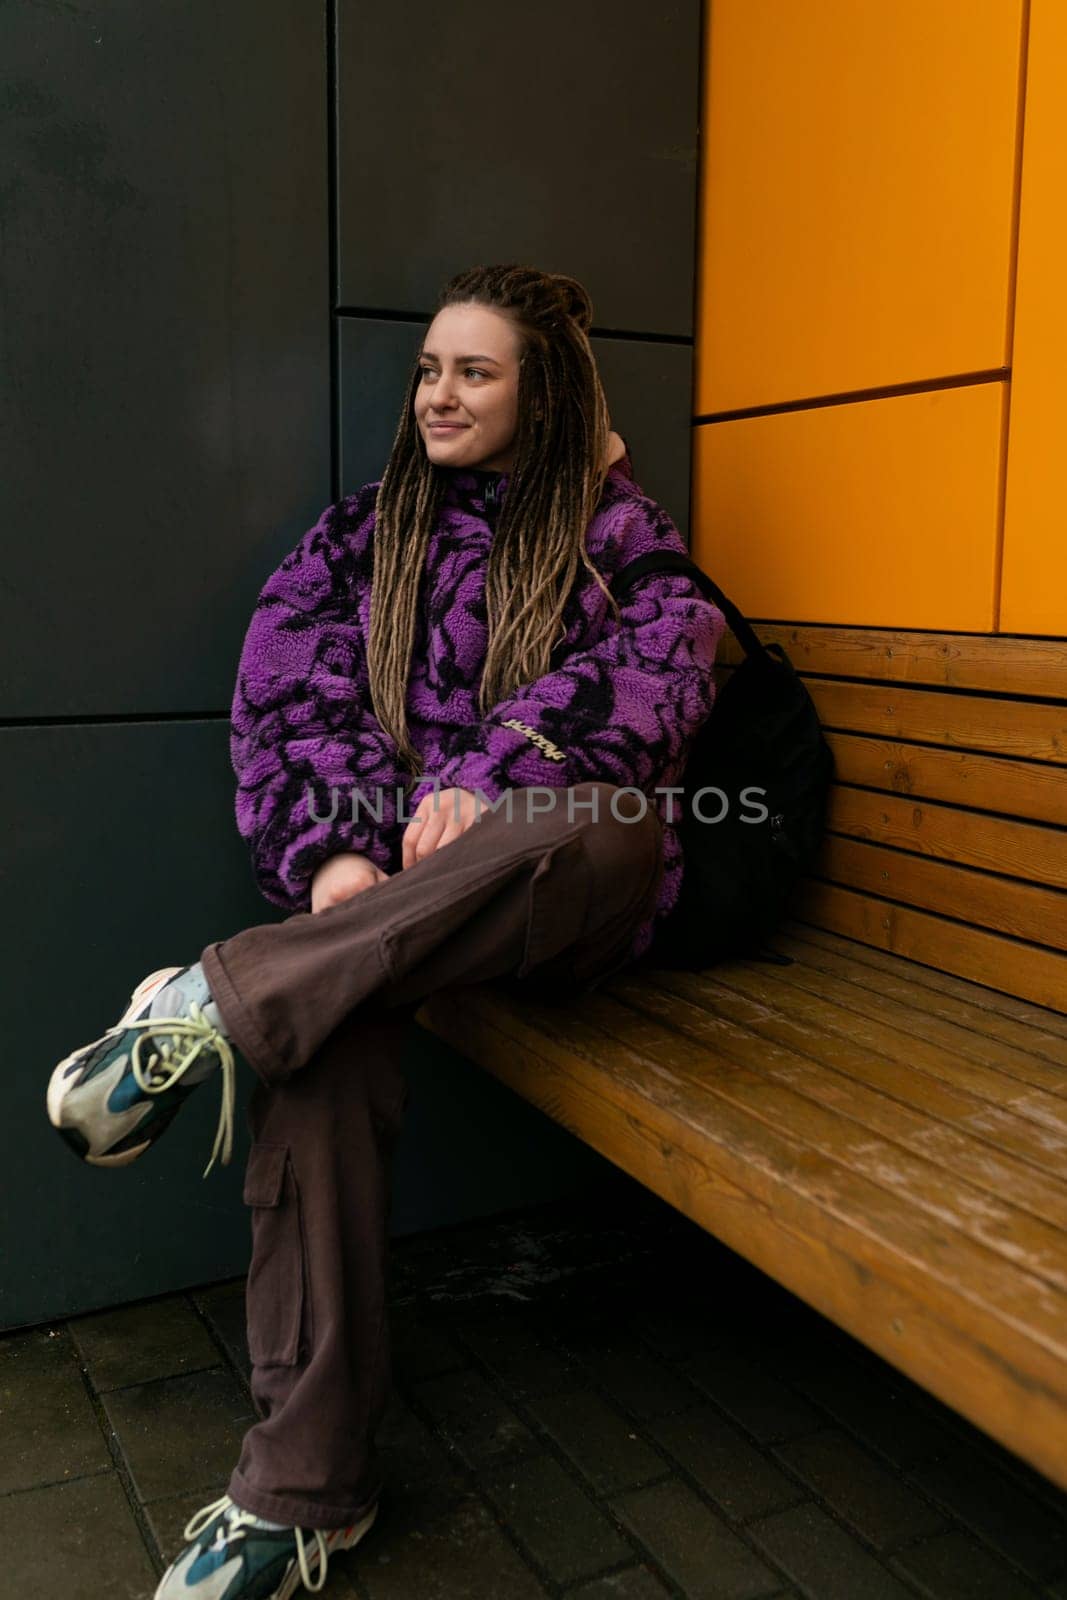 Lifestyle concept. A young woman with dreadlocks and piercings stands at the entrance to an orange house.